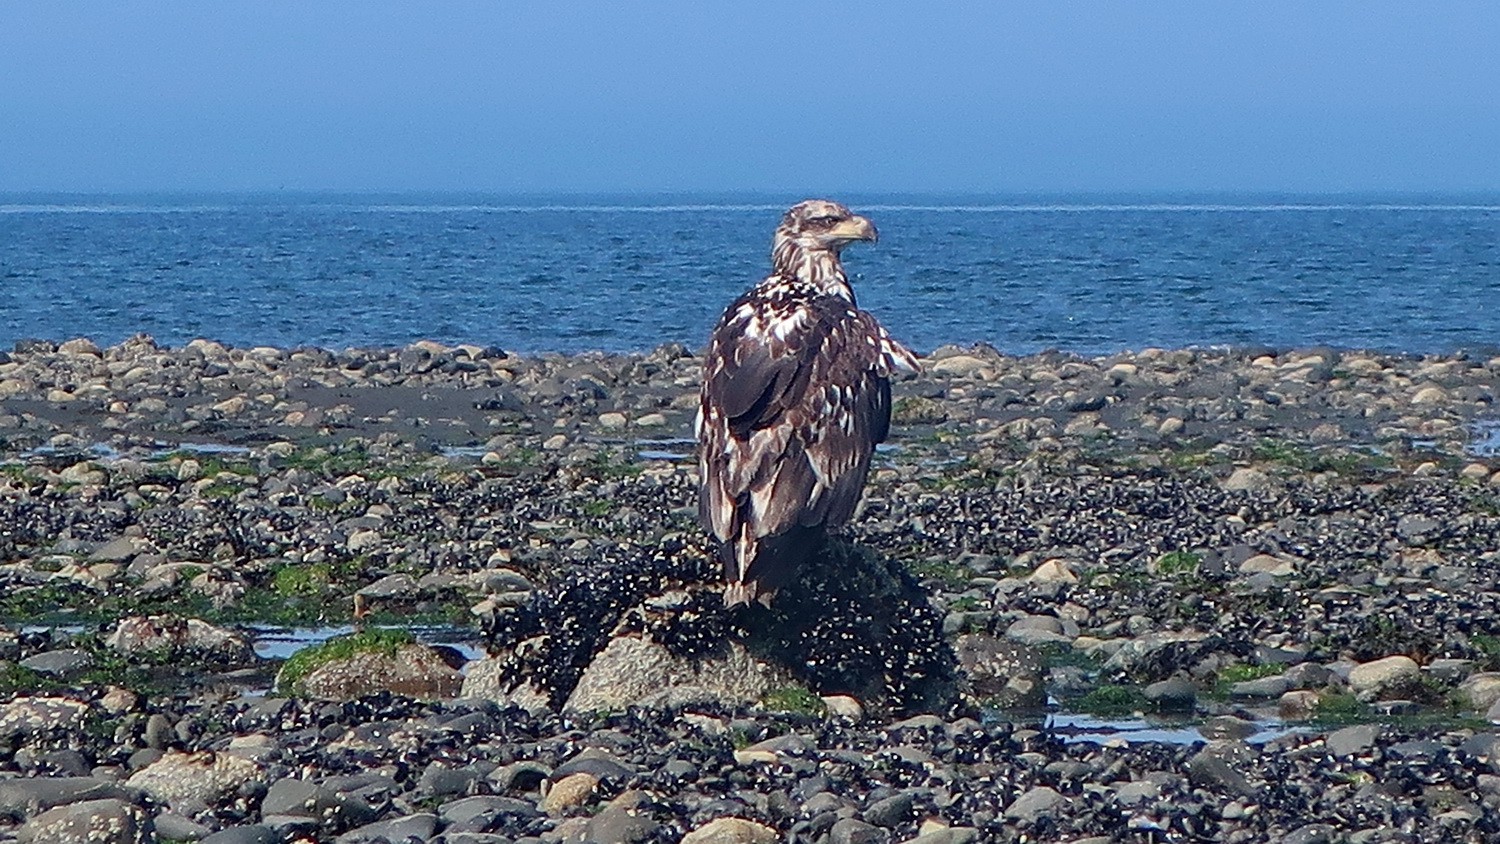 Younger Bald Eagle on the beach of Anchor Point